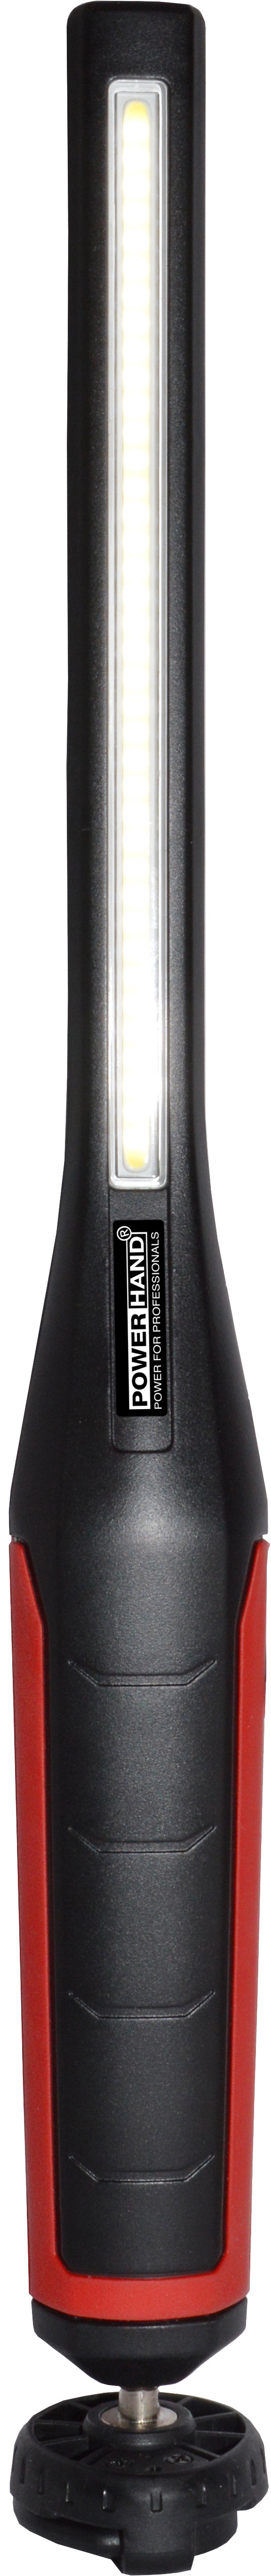 POWERHAND Gen2 7w Cob Slim Light with Dimmer Switch - Available in Red or Green